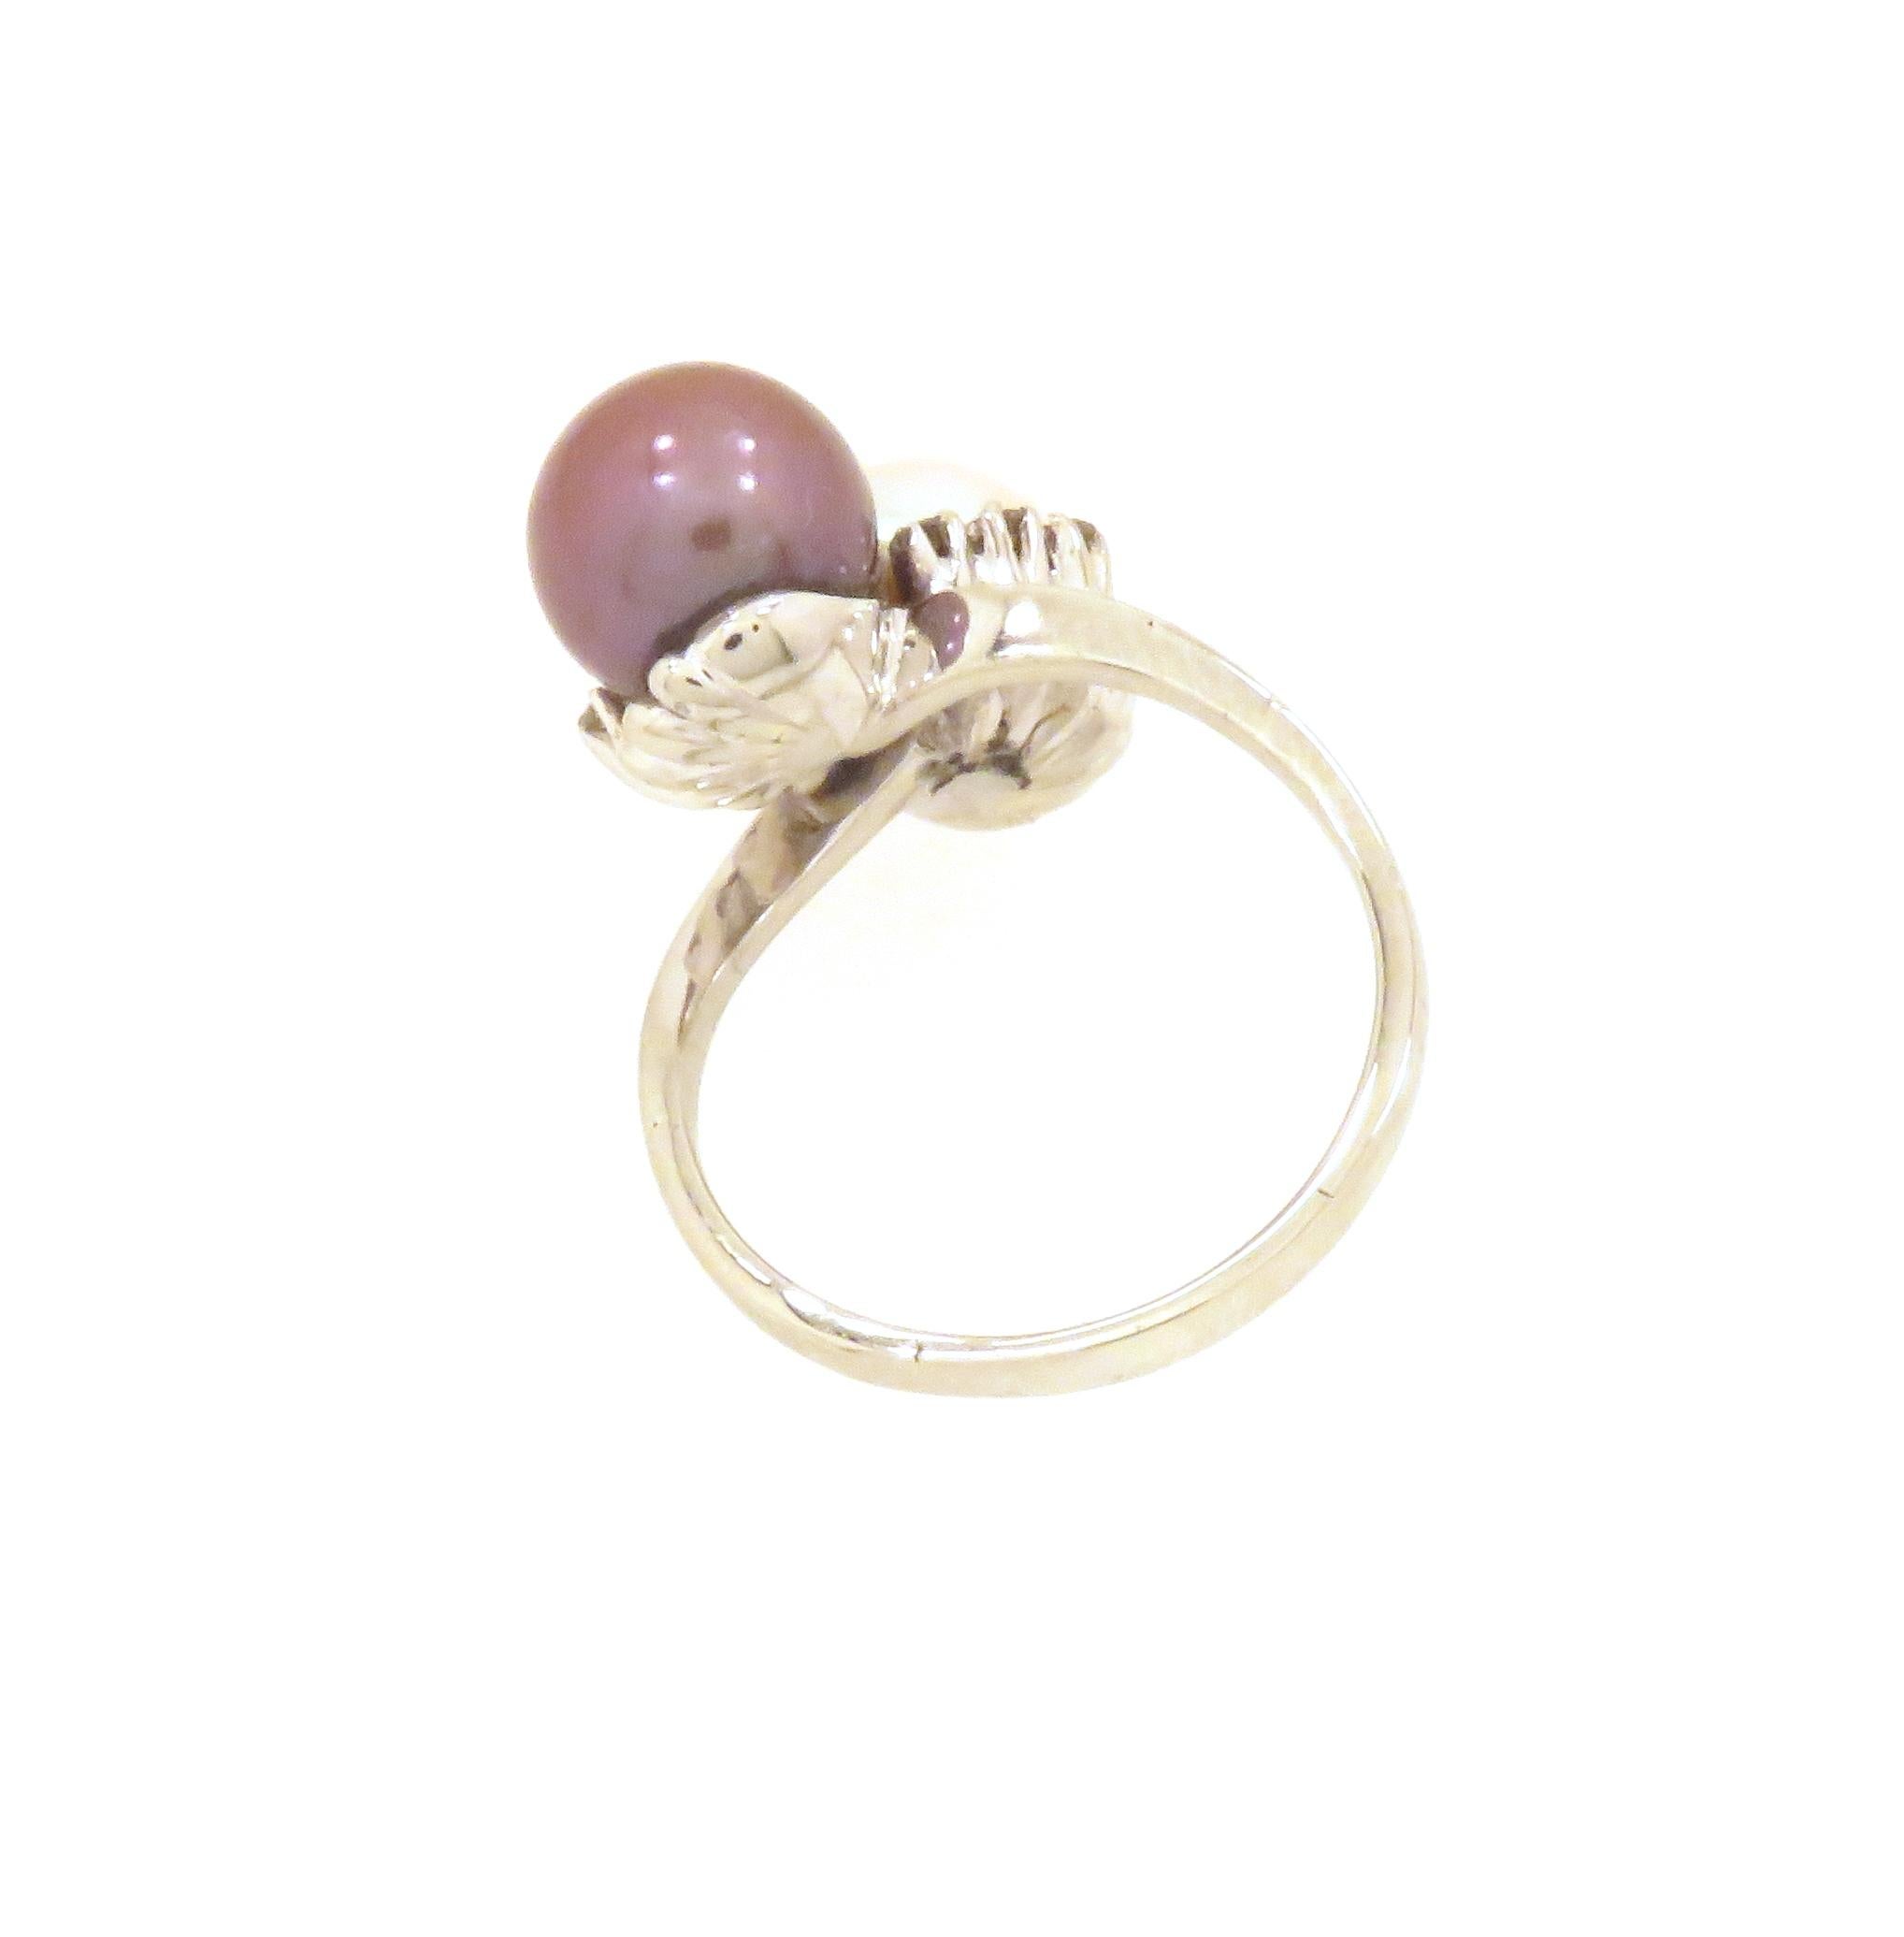 Diamonds Pearls 18 Karat White Gold Vintage Ring Handcrafted in Italy For Sale 1